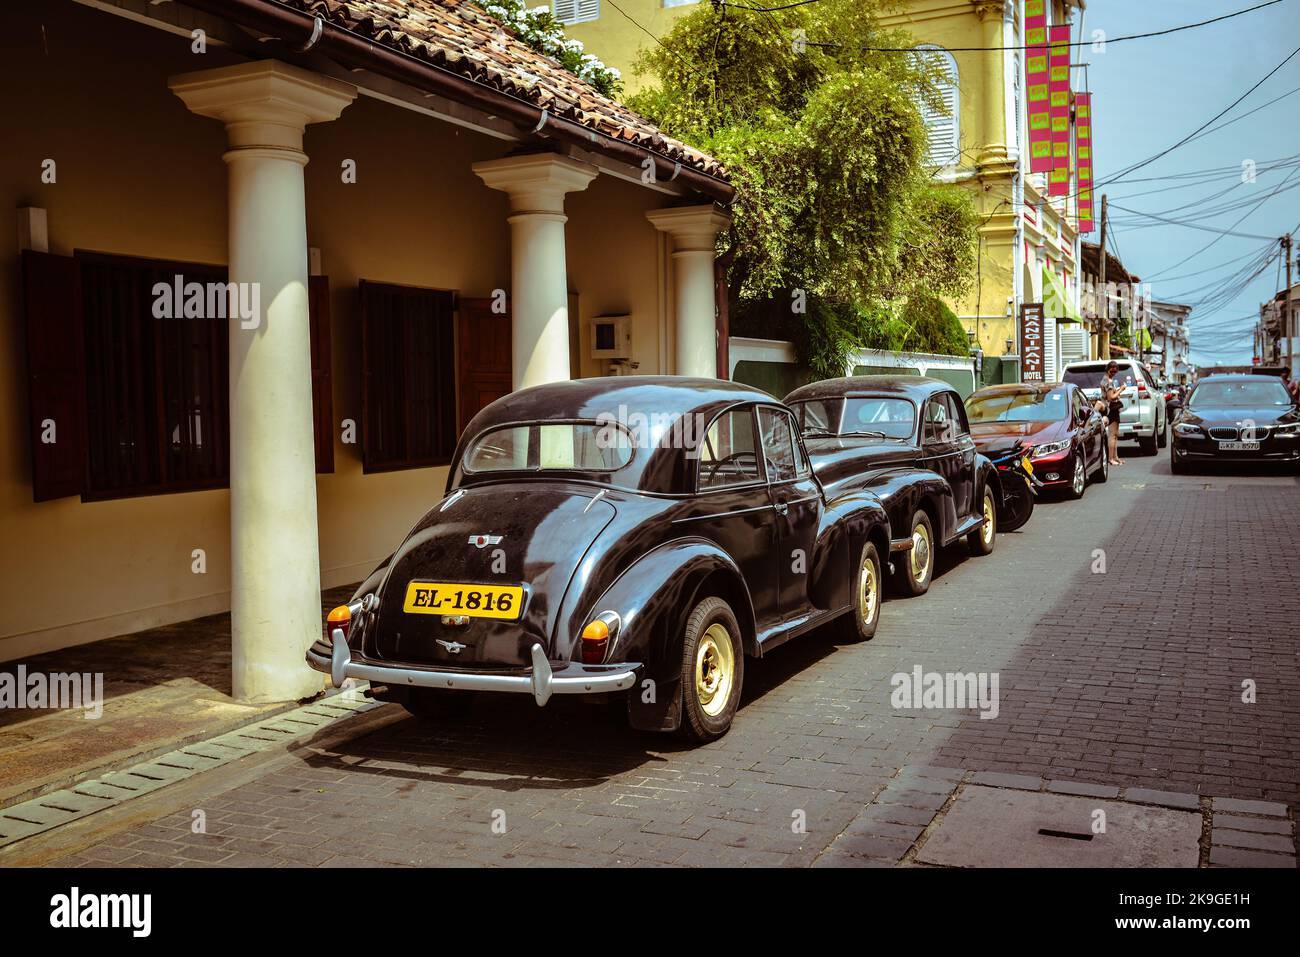 The view of the cars parked in the Dickwella street on a sunny day in Sri Lanka Stock Photo